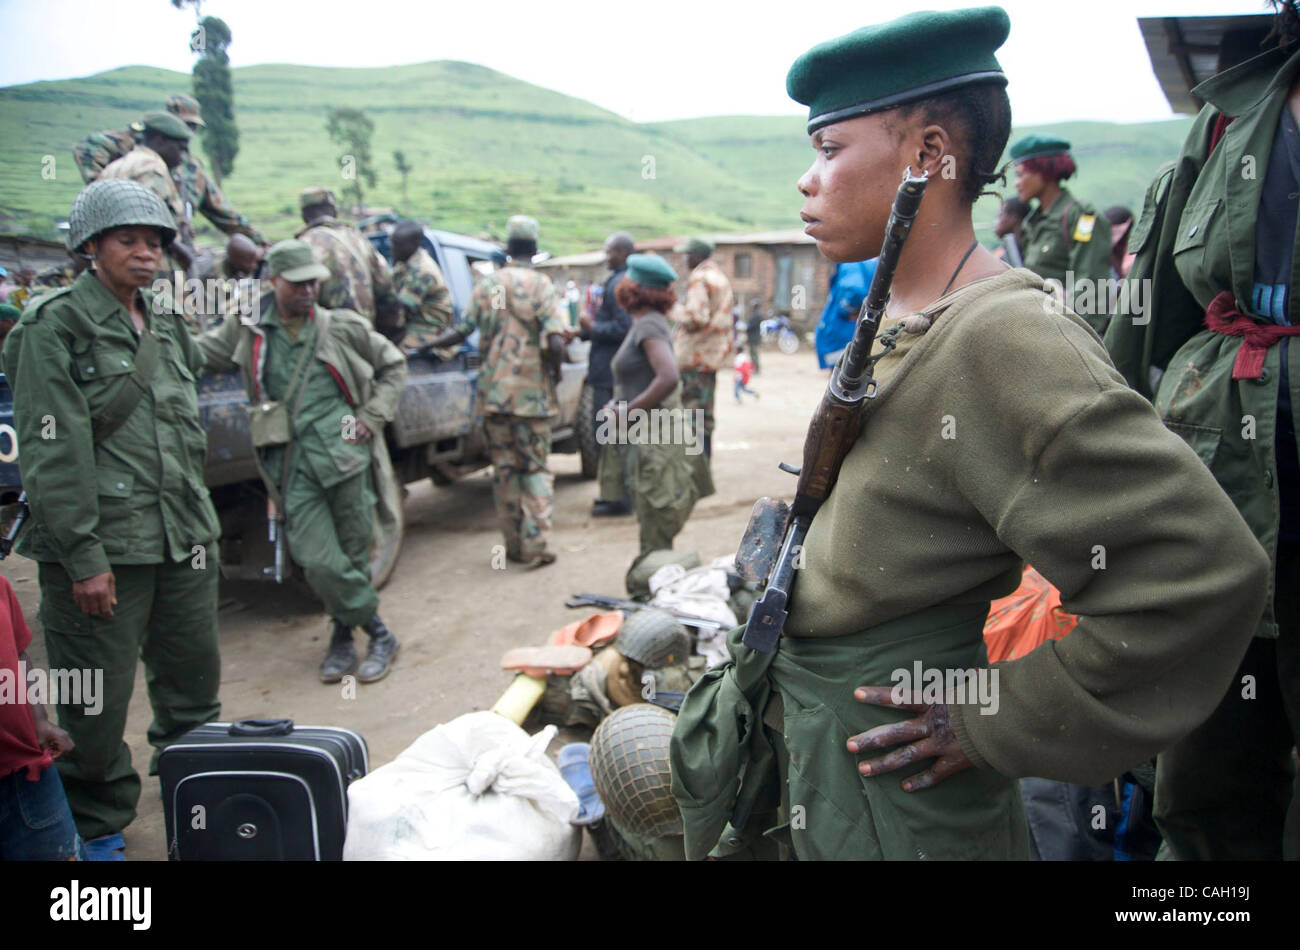 Female soldiers of FARDC with Rwandan soldiers and CNDP, Mushake, Democratic Republic of Congo Stock Photo